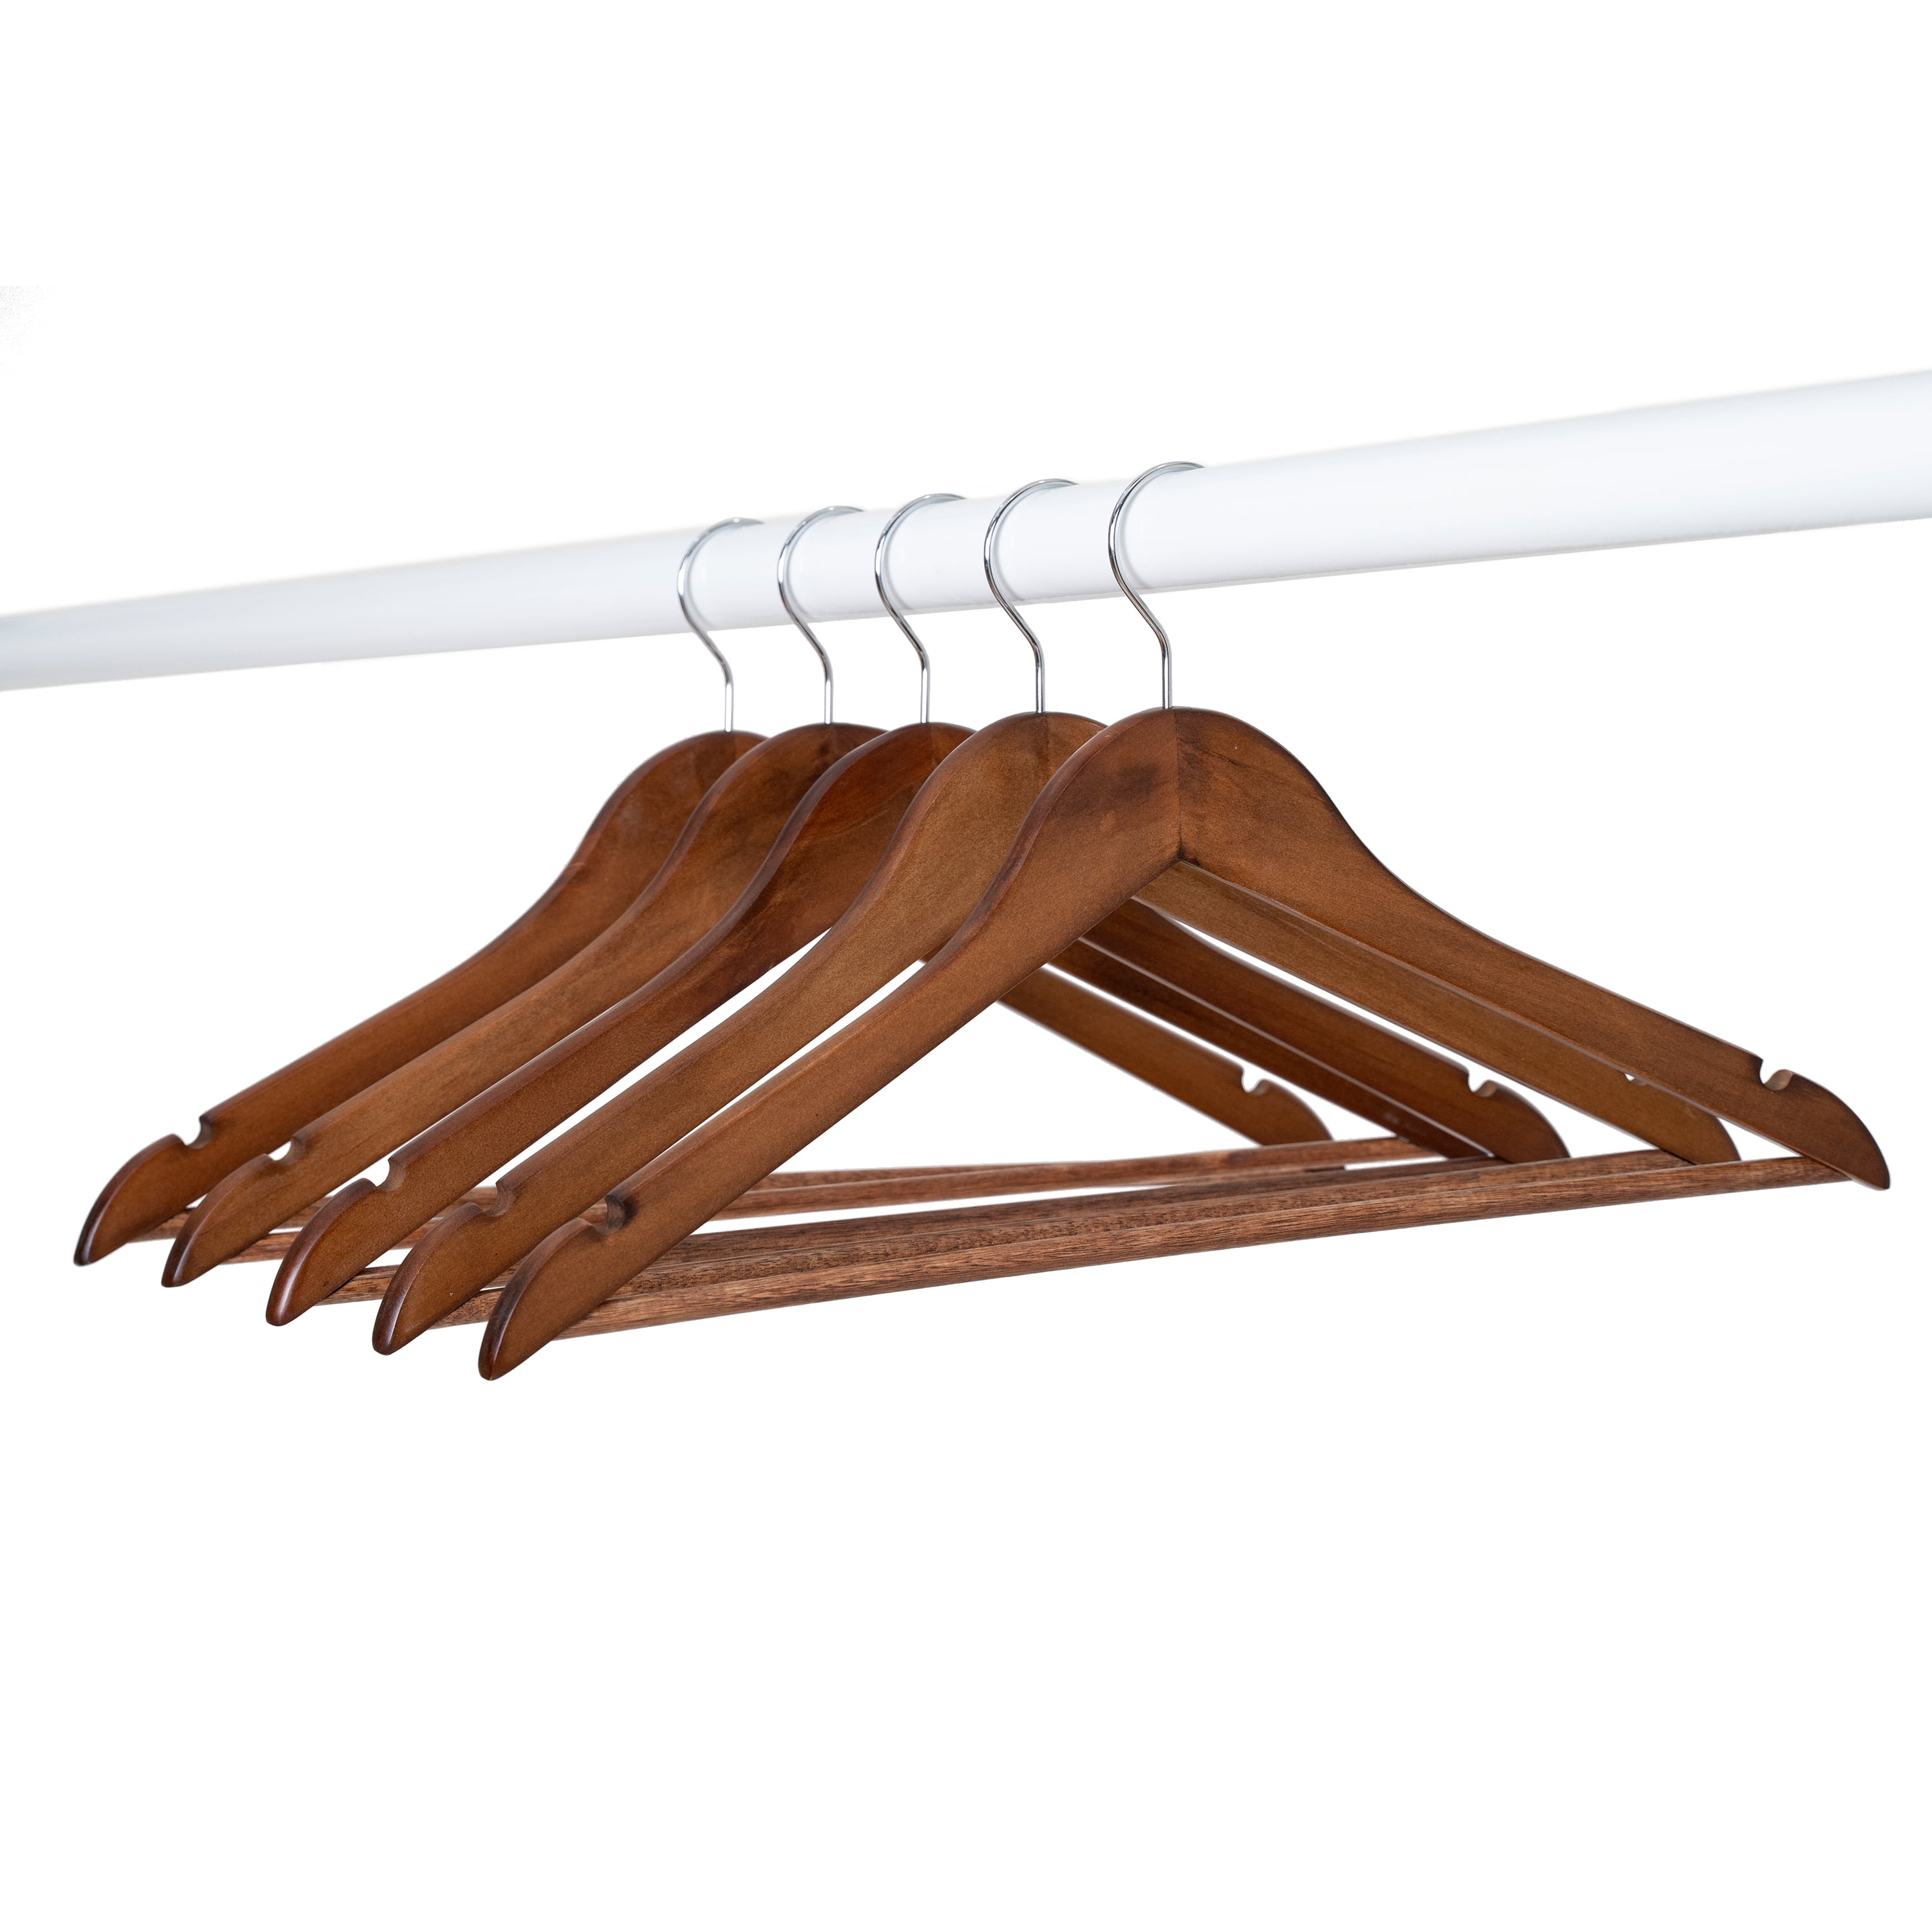 Walnut Finish Notched Wooden Suit Hanger with Non-Slip Bar (Case of 25) 200523-025